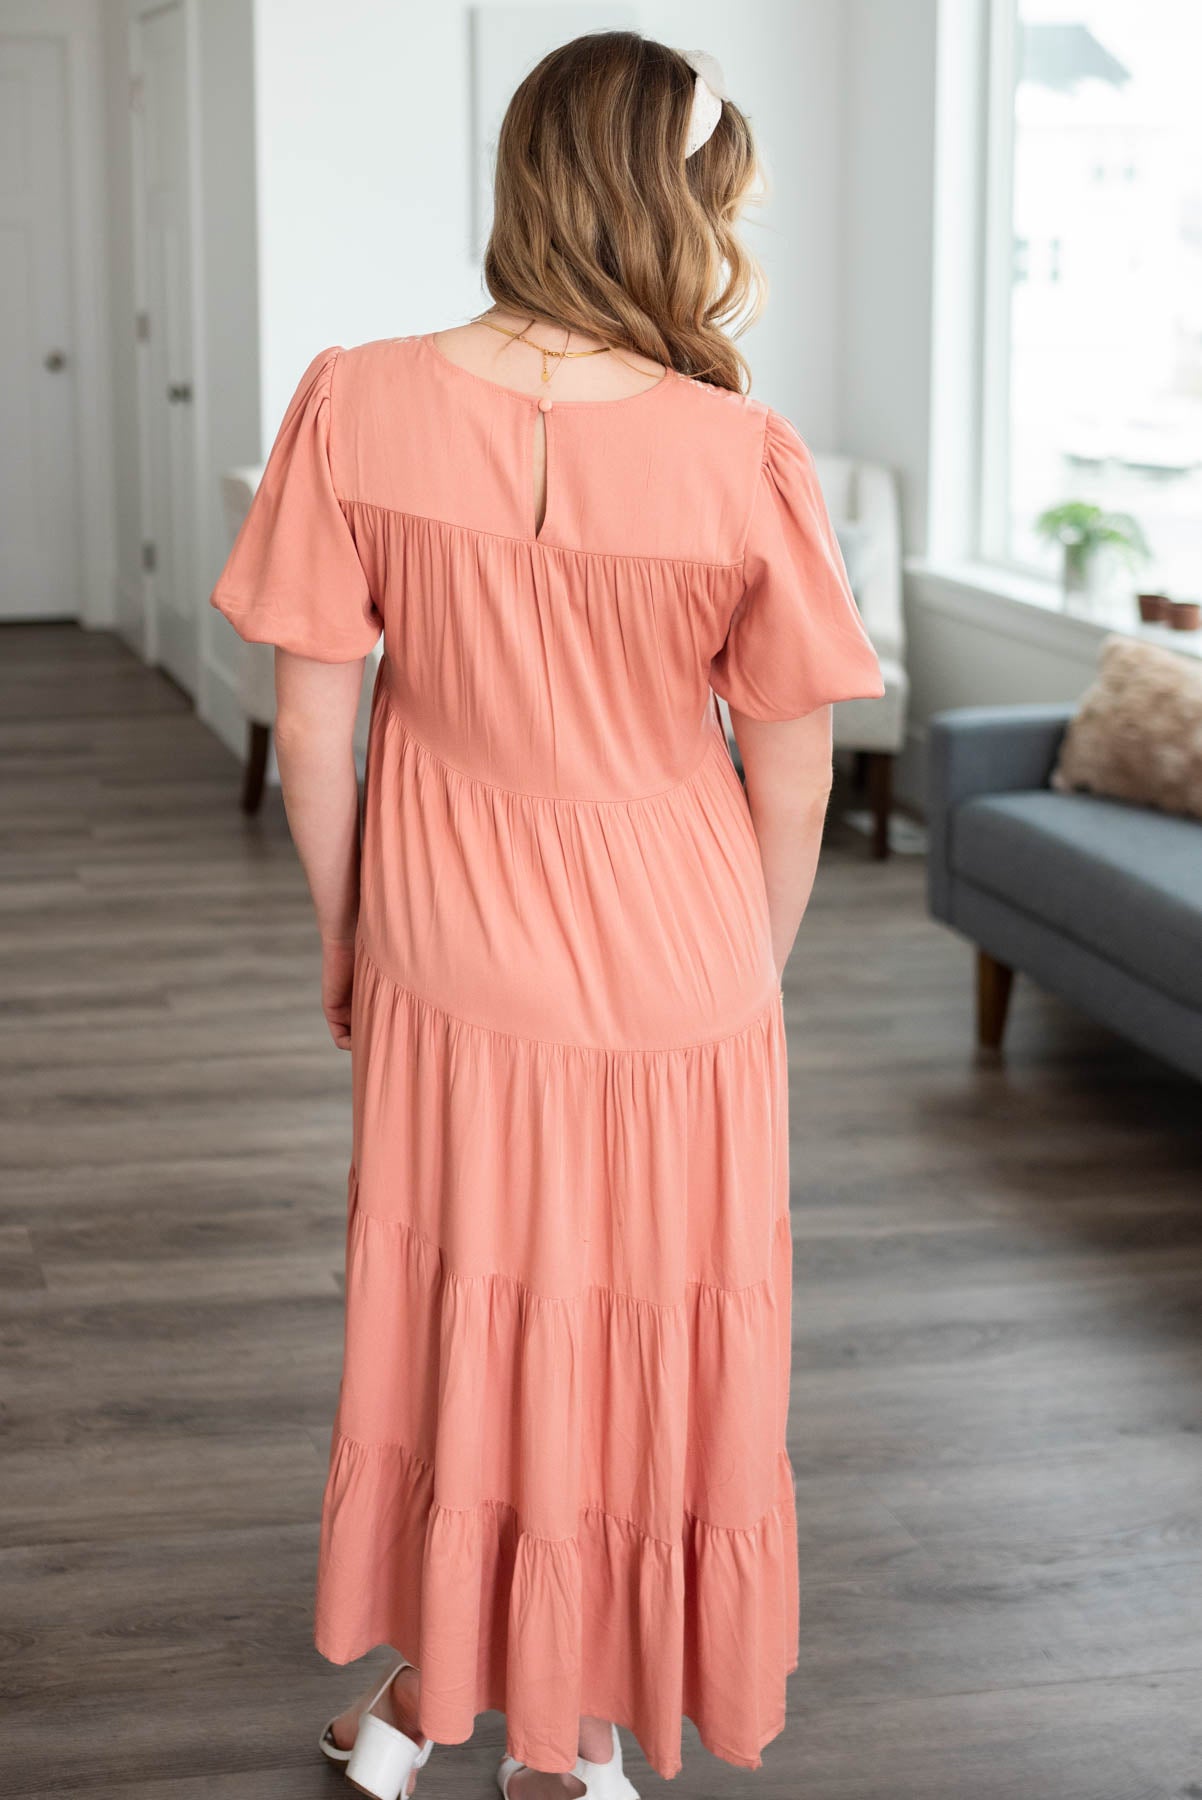 Back view of the dusty pink embroidered tiered dress